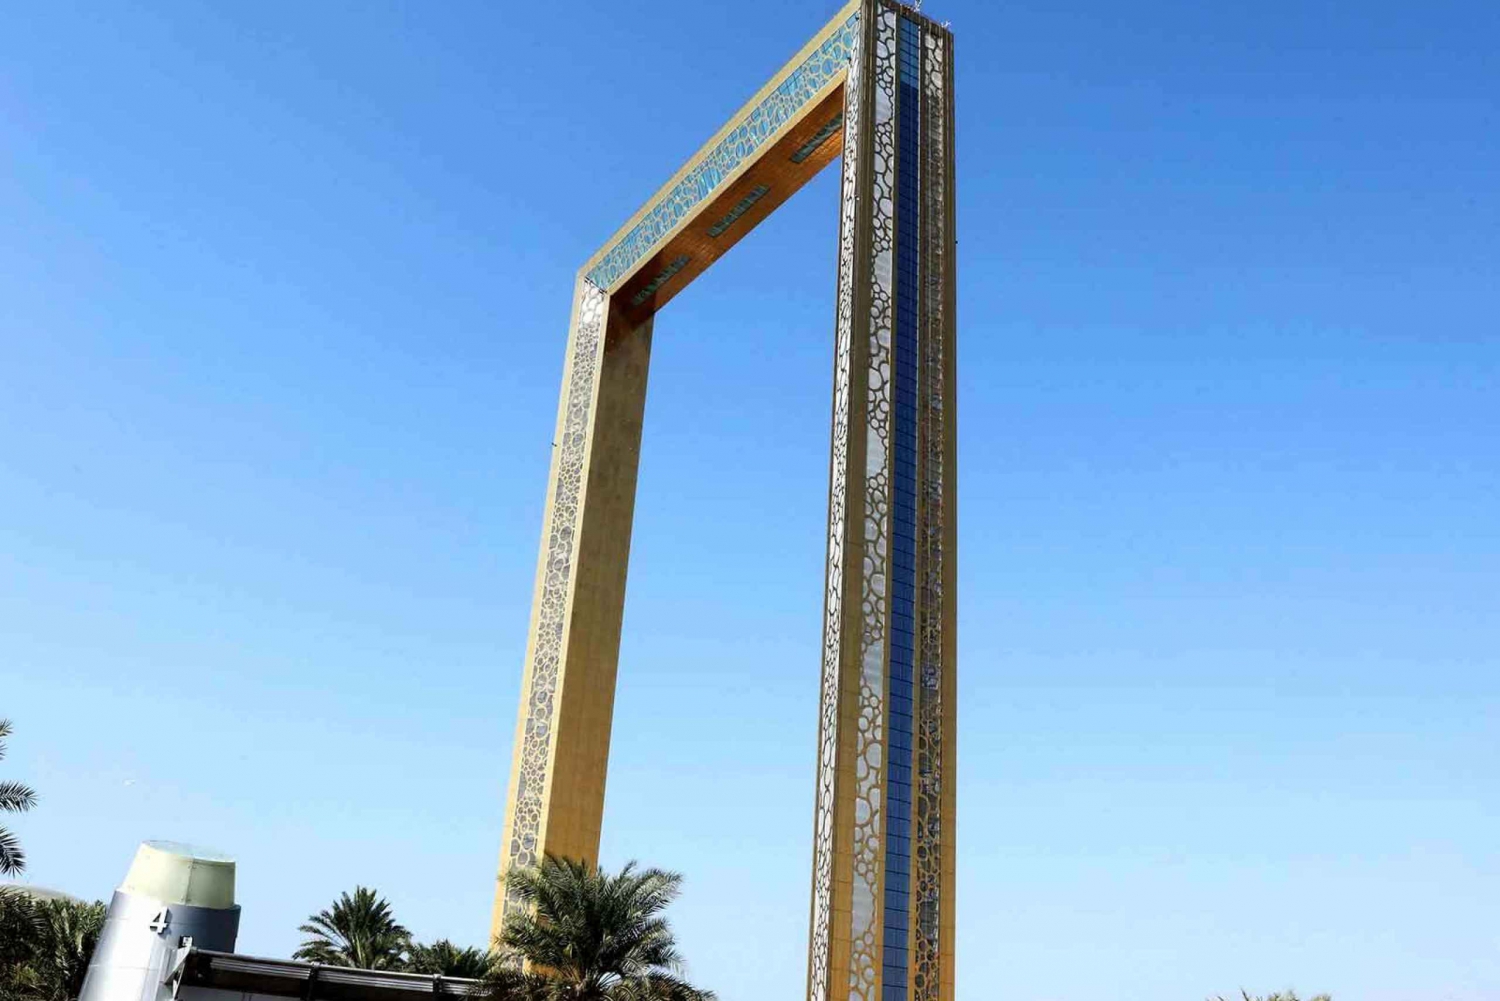 Dubai: Frame Entry Ticket with Pickup and Drop-off